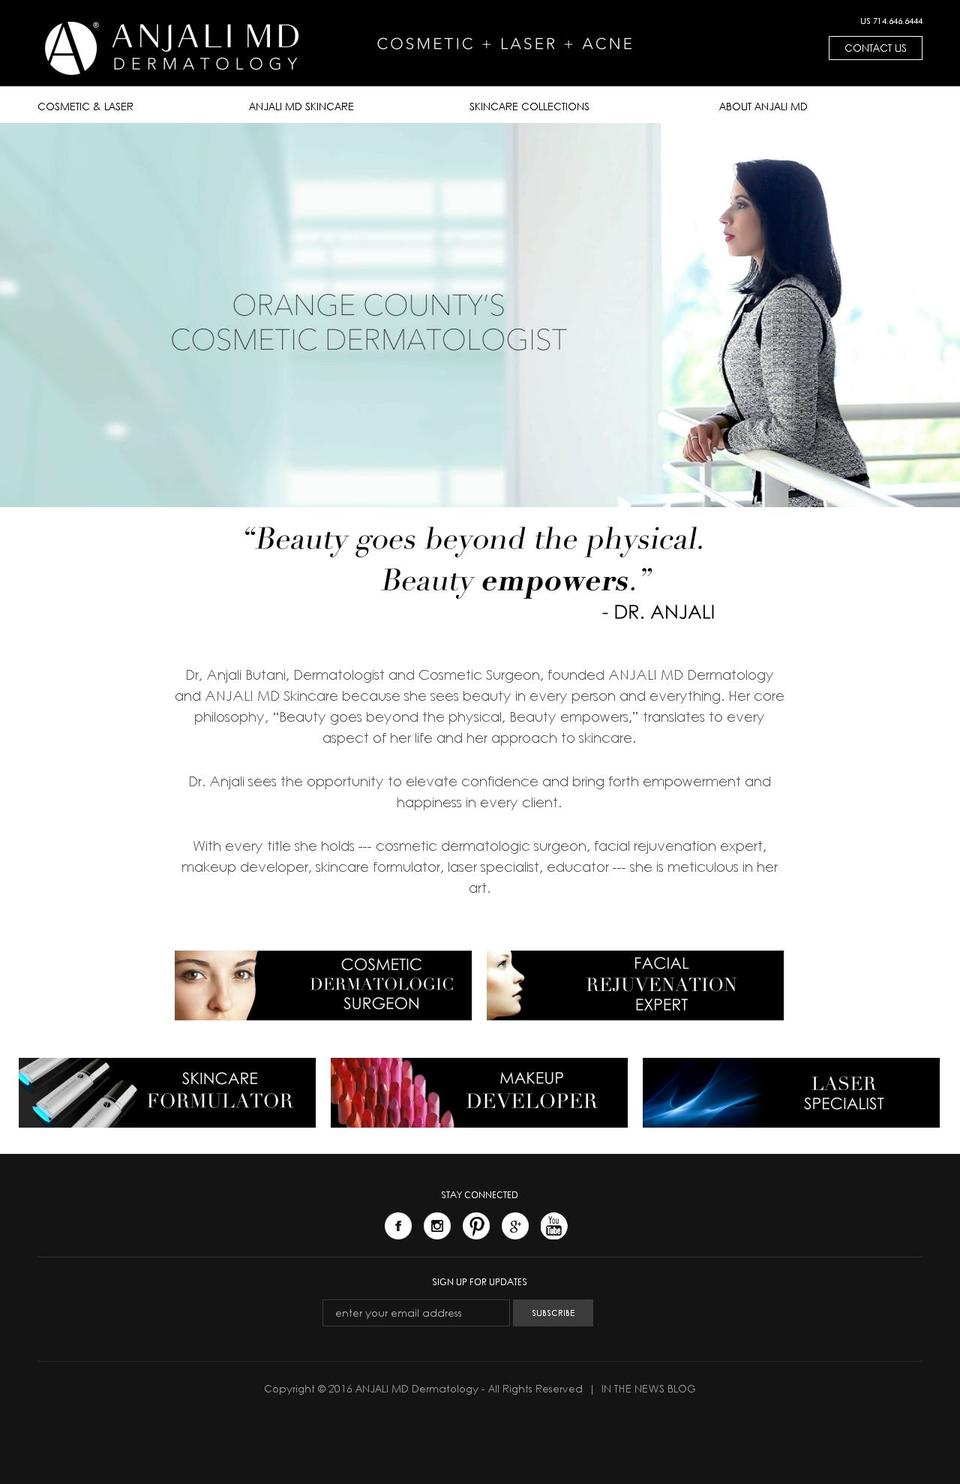 Anjali MD Site 2016 Shopify theme site example butanidermatology.co